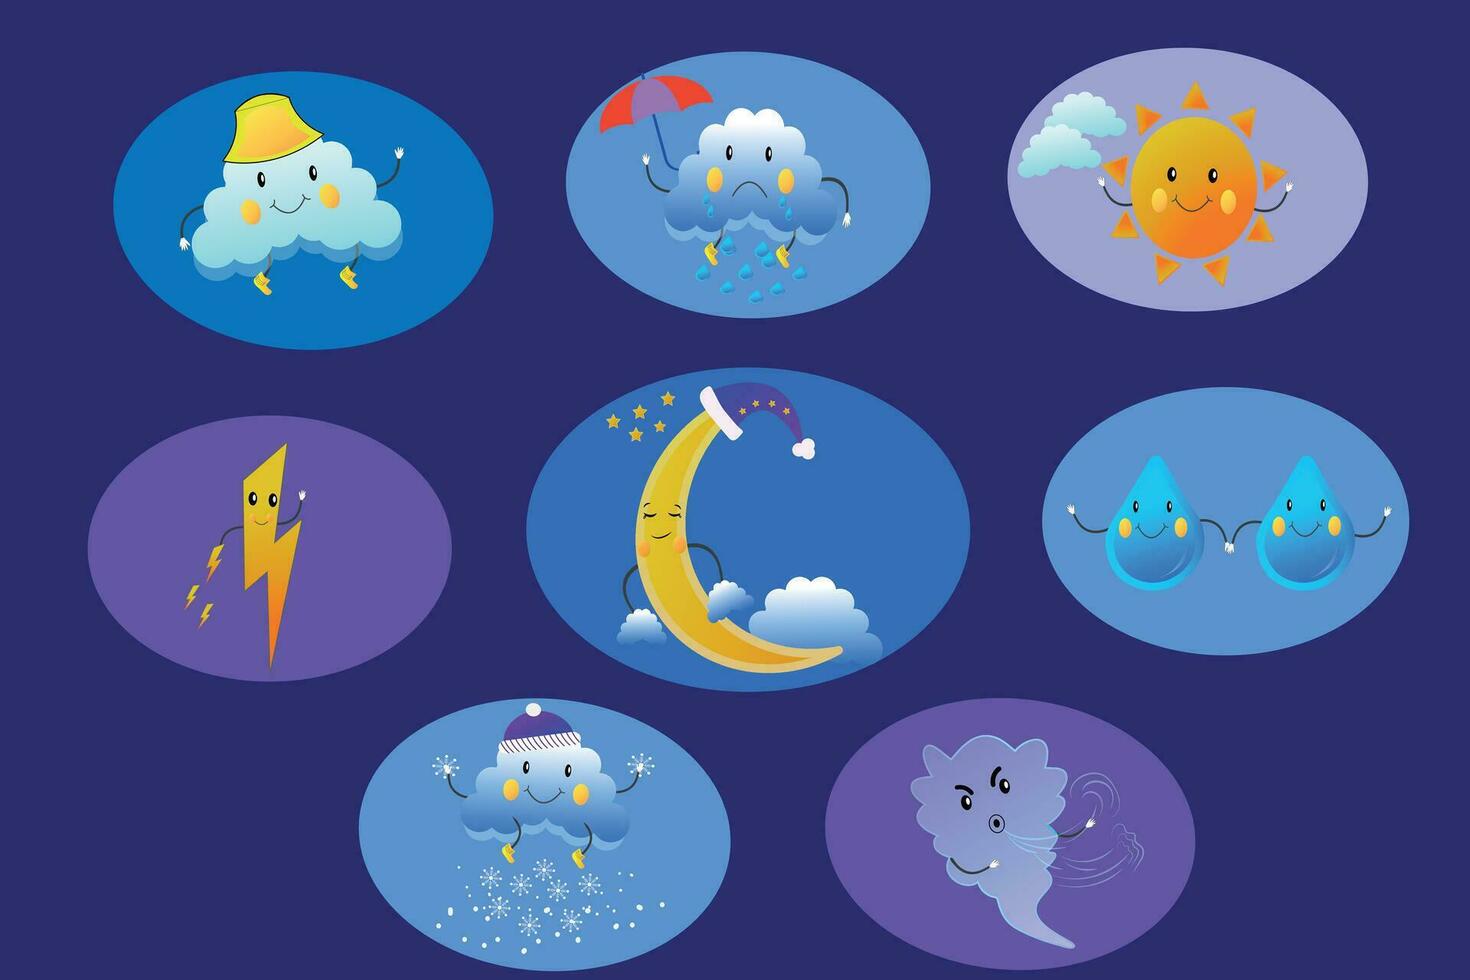 Weather icons pack. Colorful weather forecast design elements, perfect for mobile apps and widgets. Contains icons of the sun, clouds, snowflakes, wind, rain, temperature vector